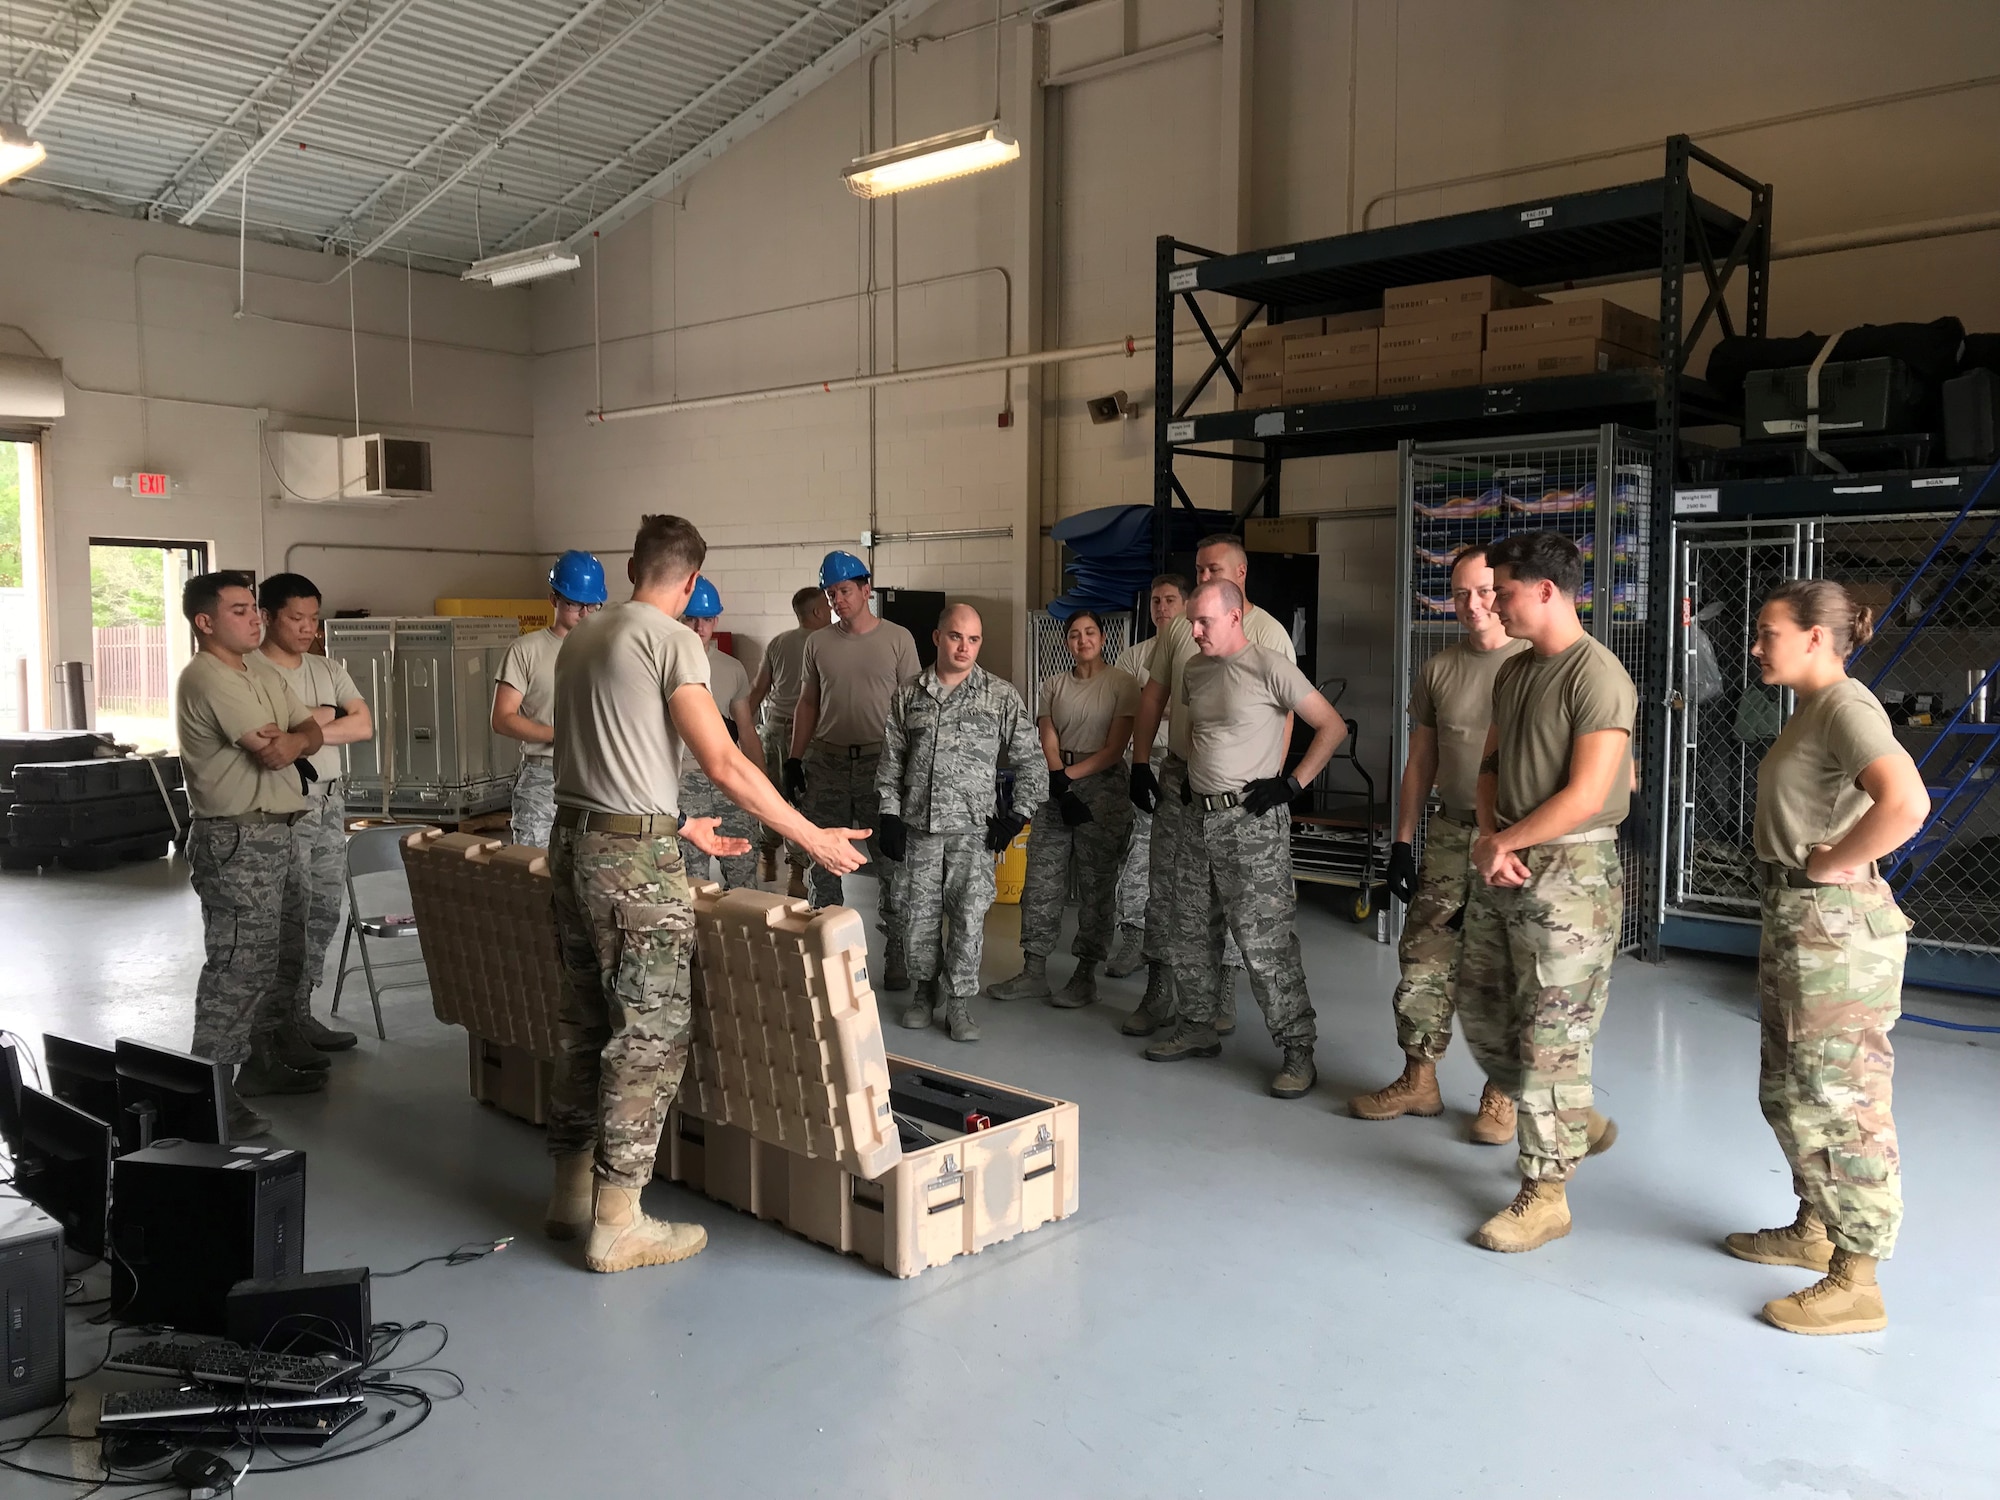 Staff Sgt. Joshua-James Patrick, 2nd Combat Weather Systems Squadron instructor, shows Airmen from the 25th Operational Weather Squadron the mast for a Portable Doppler Radar (PDR) system as part of a Deployed Weather Systems Training class Aug. 20, 2019, at Hurlburt Field, Florida. The PDR is used by the Air Force at established and austere locations worldwide to provide real time weather radar. (U.S. Air Force photo by Tech. Sgt. Andrew Meier)